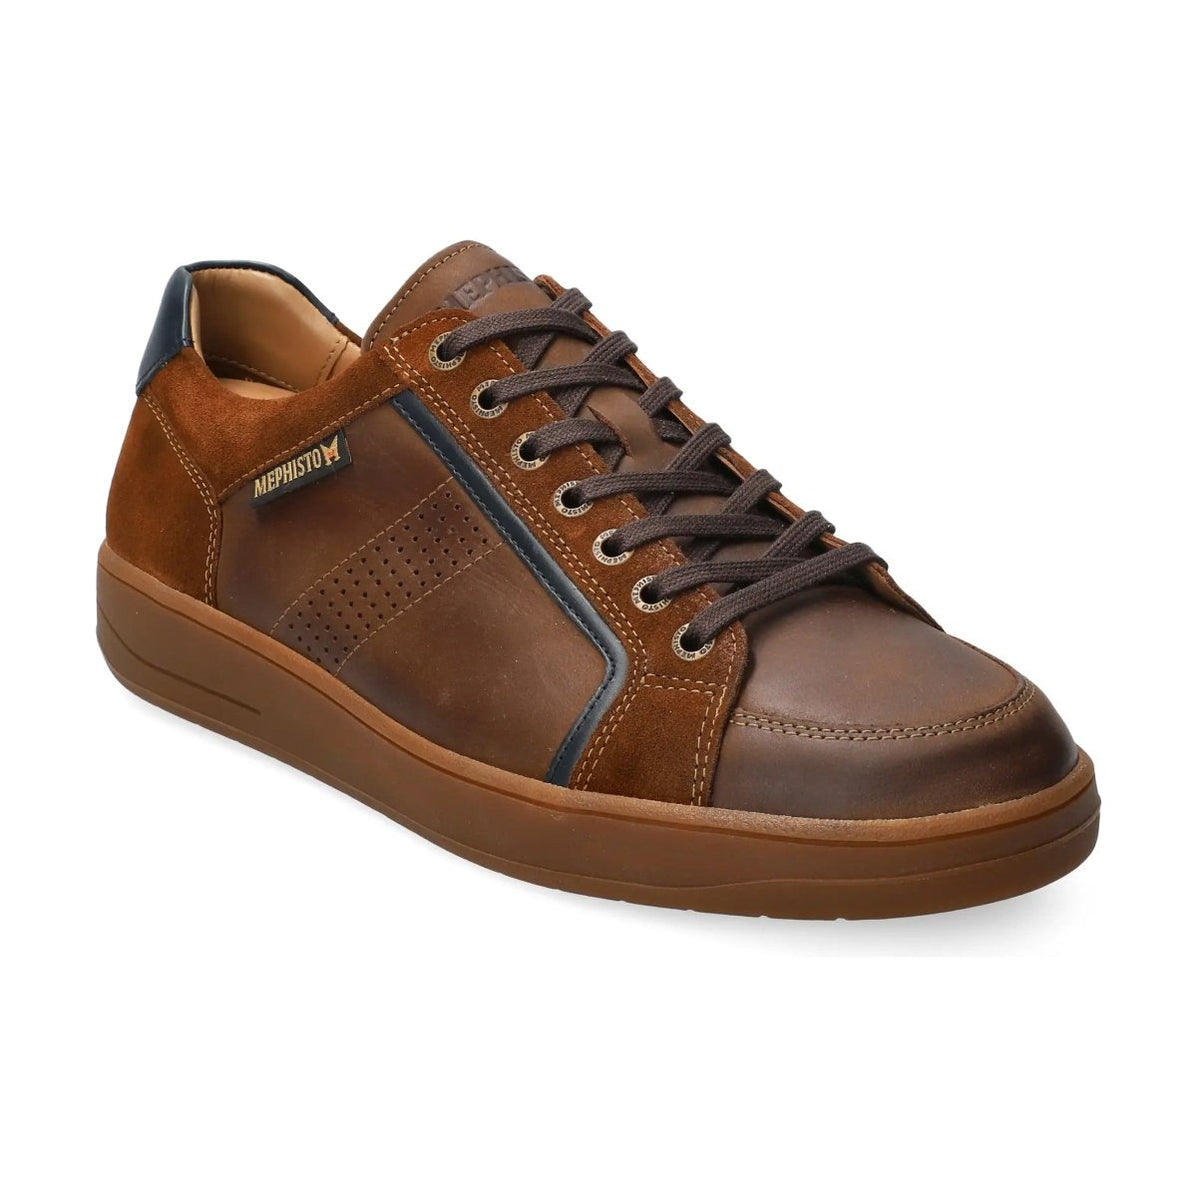 Mephisto Men's Harrison Tobacco - Tip Top Shoes of New York